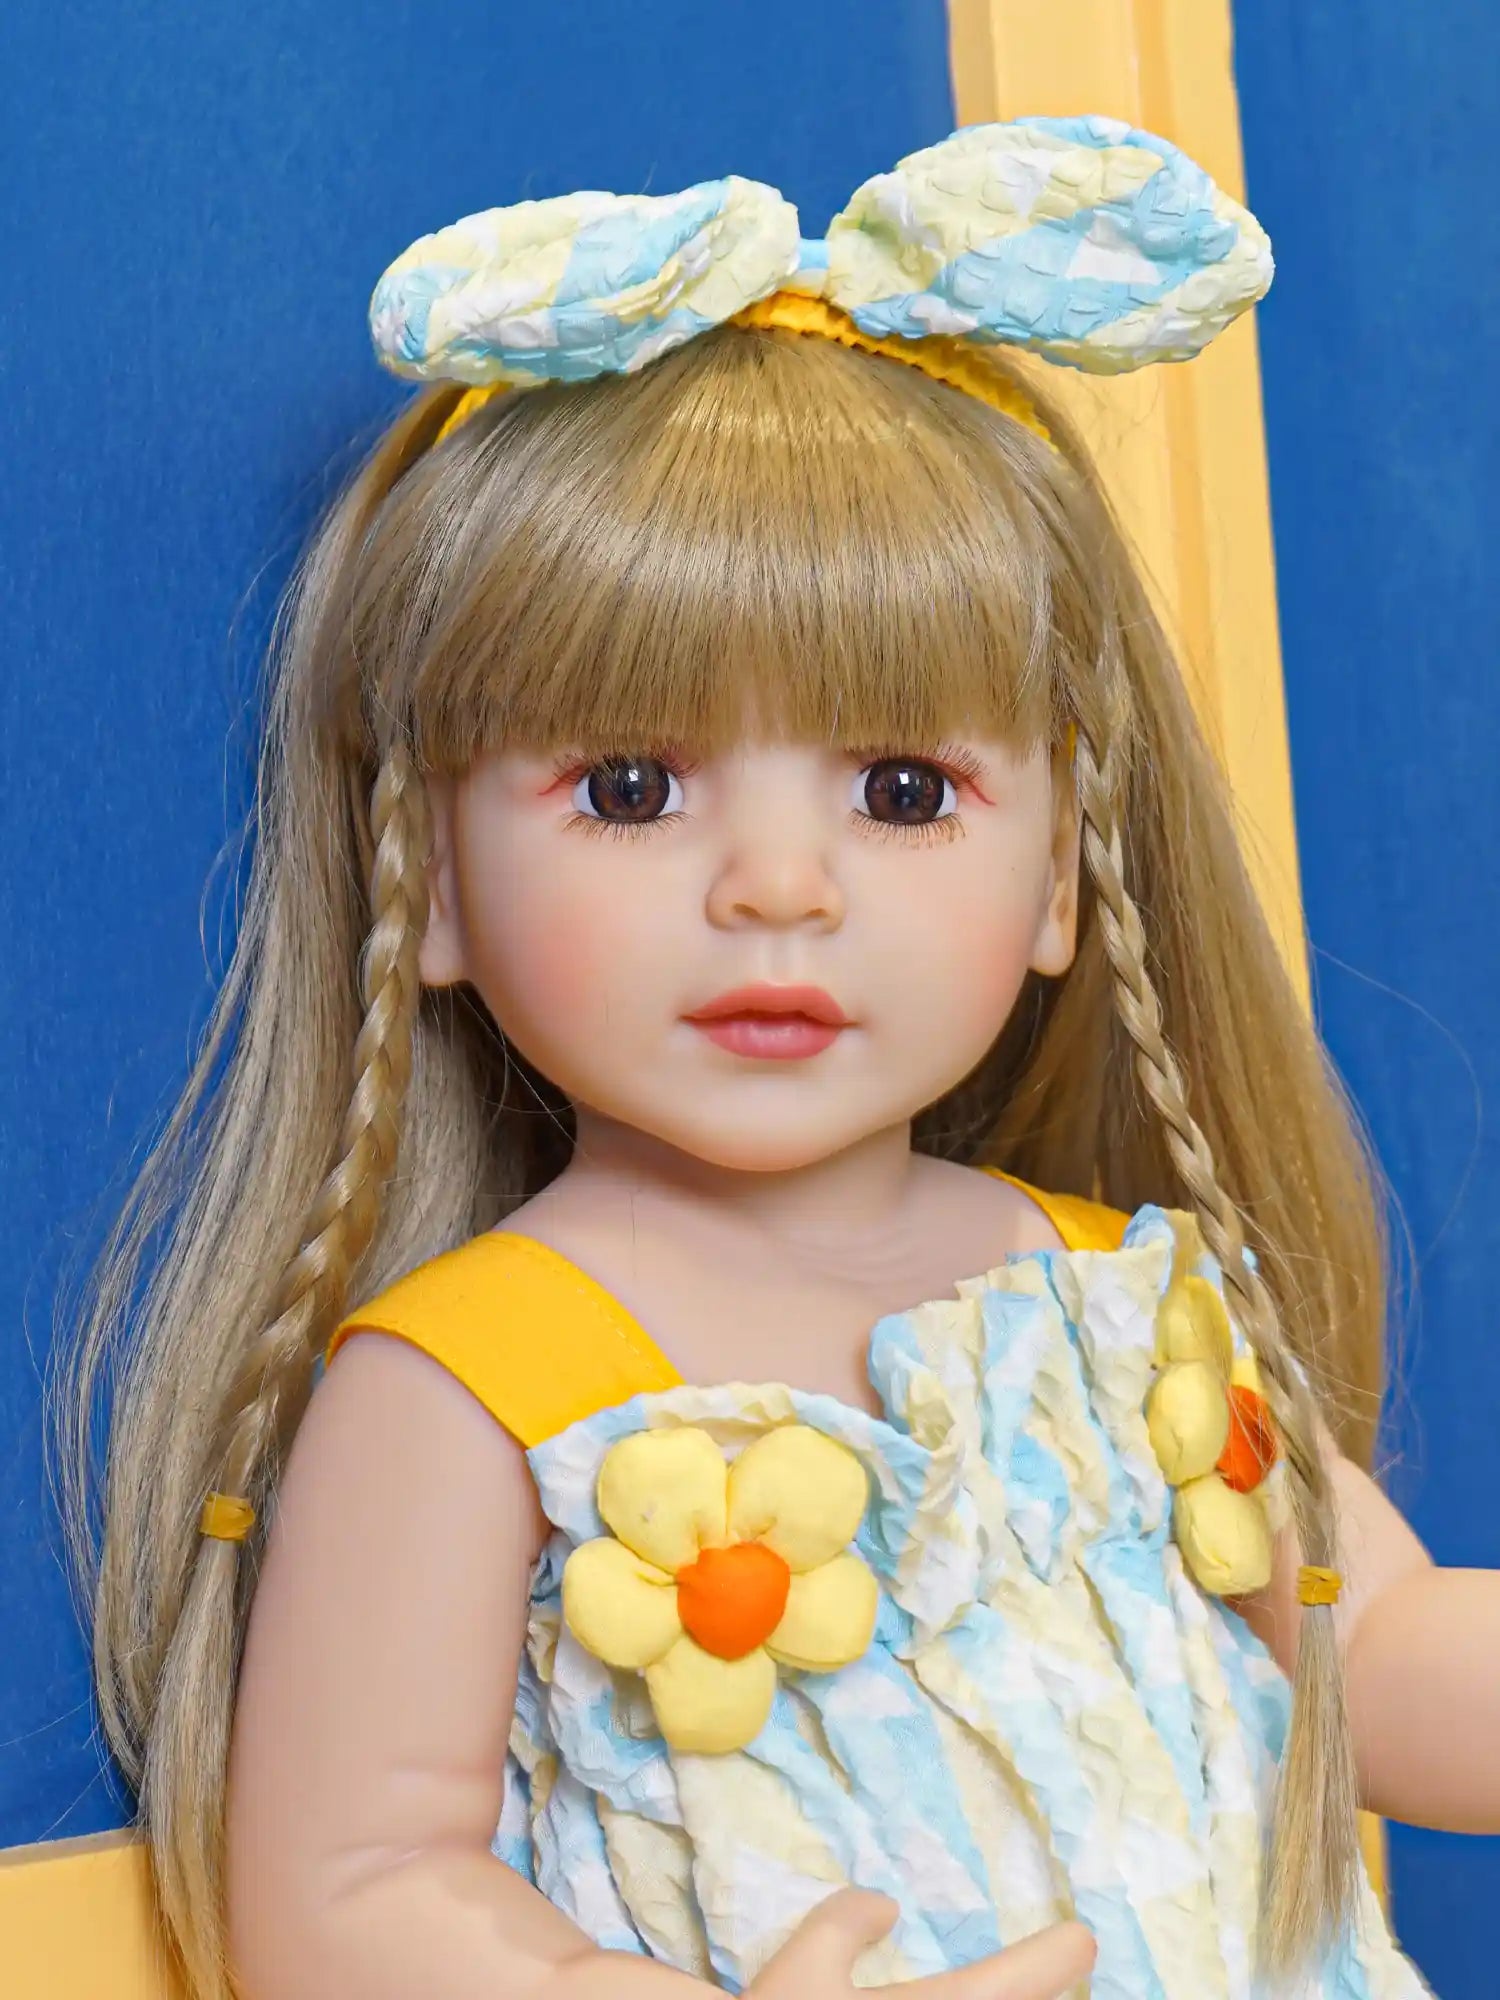 A blonde doll in a blue ruffle dress, with matching hairband, seated.